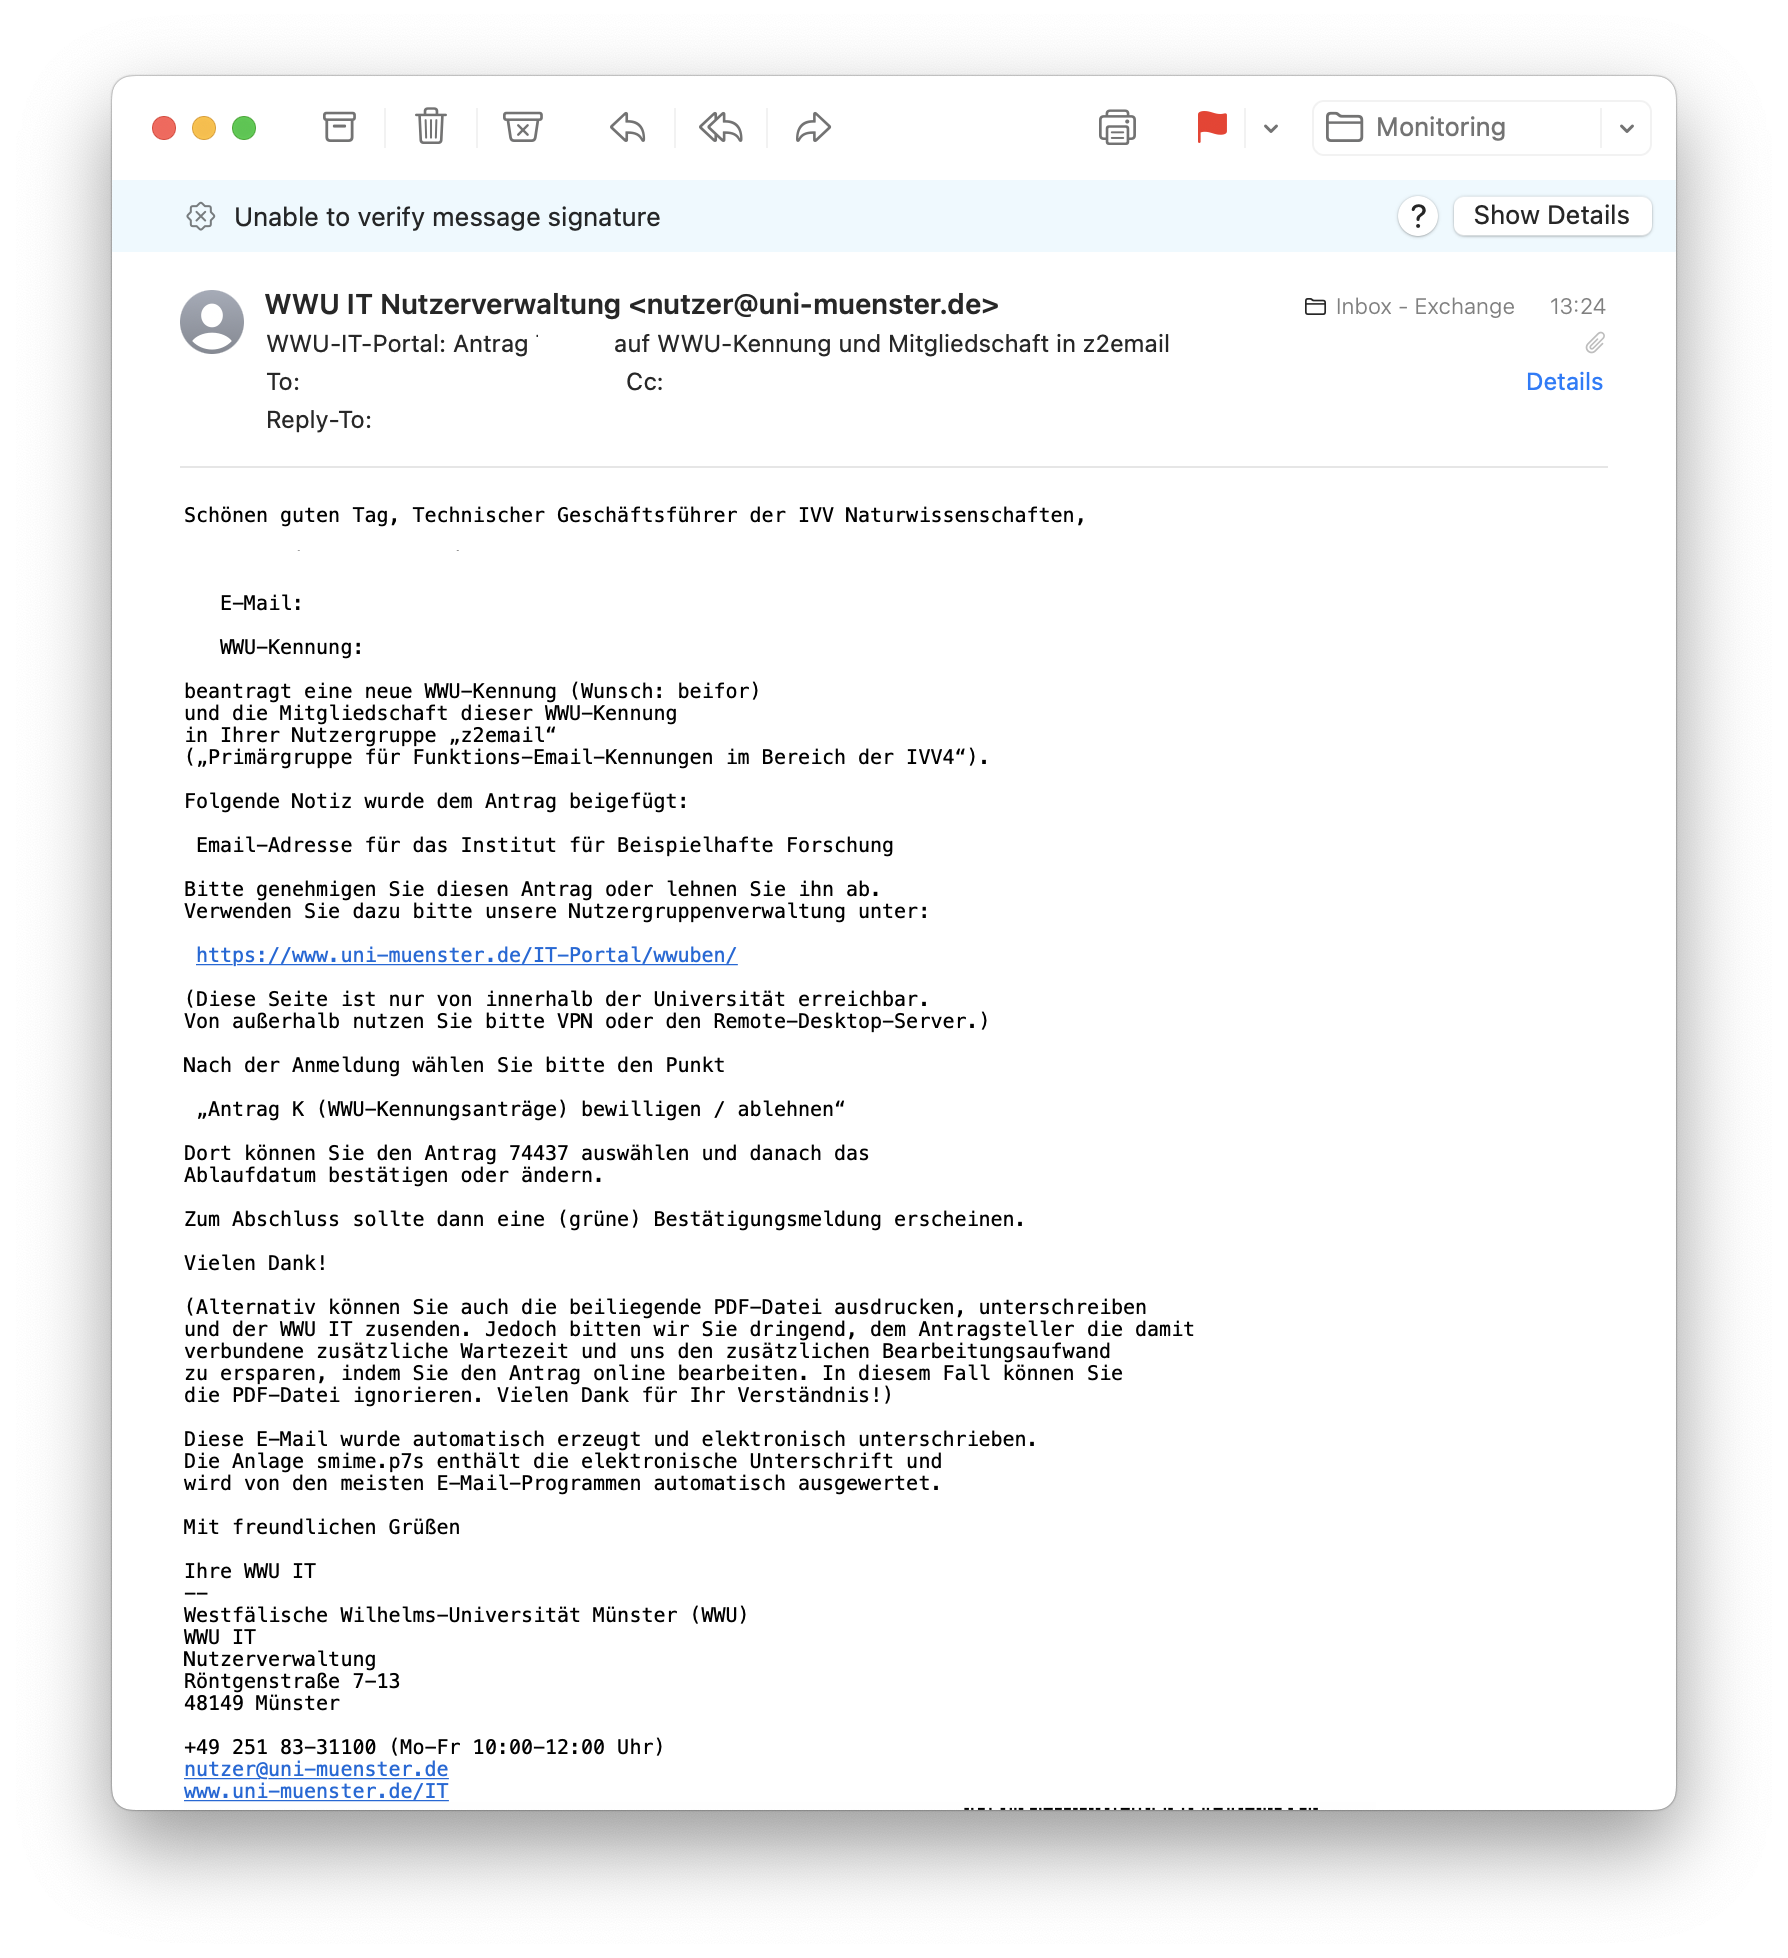 Copy of the application by email